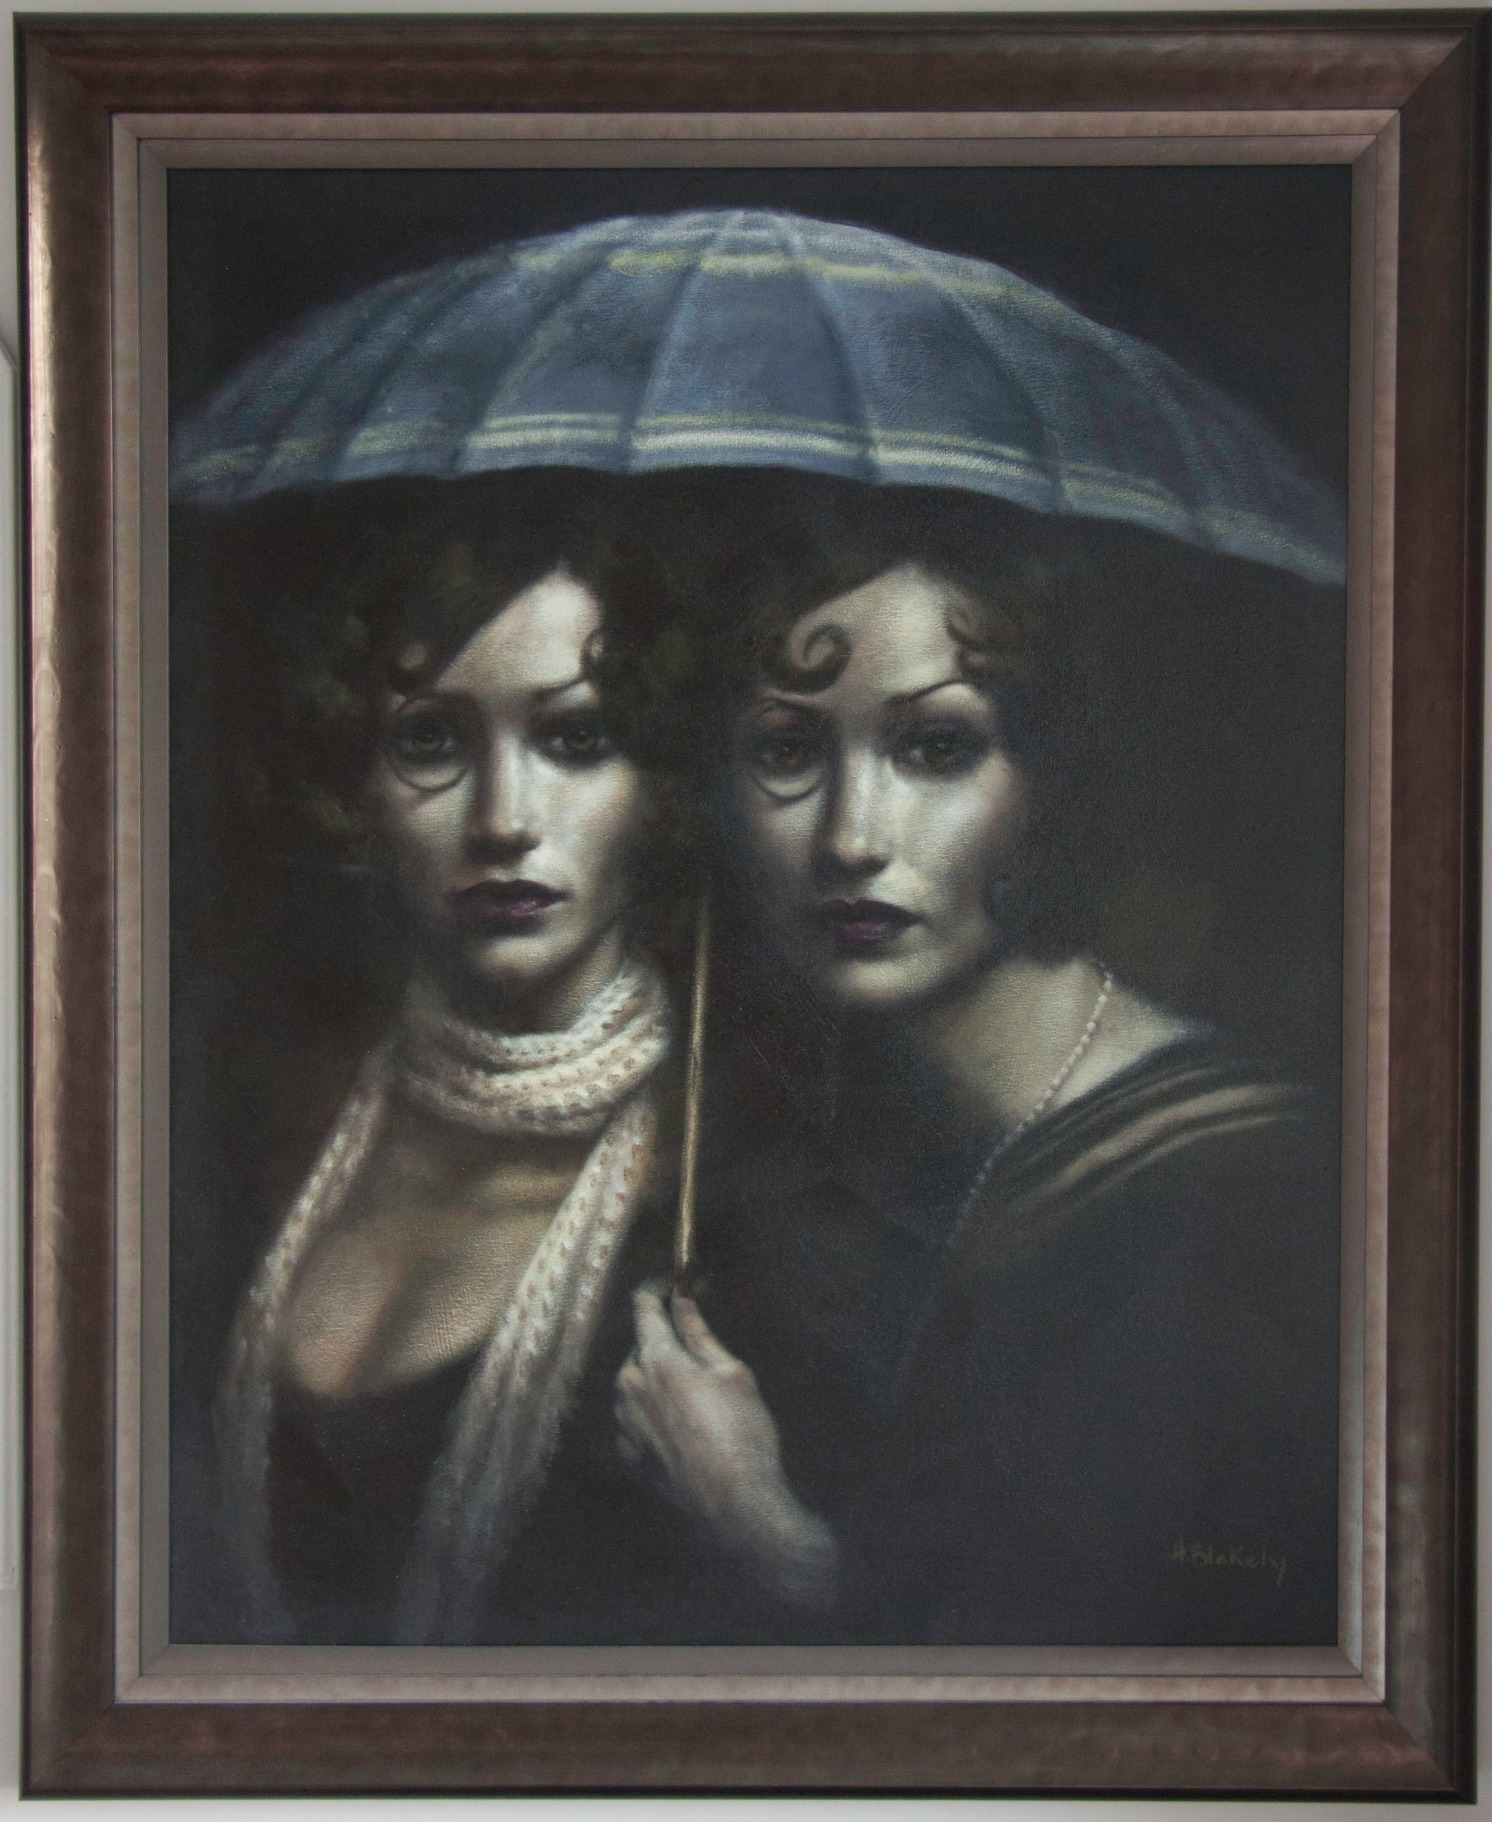 Between the Lines by Hamish Blakely